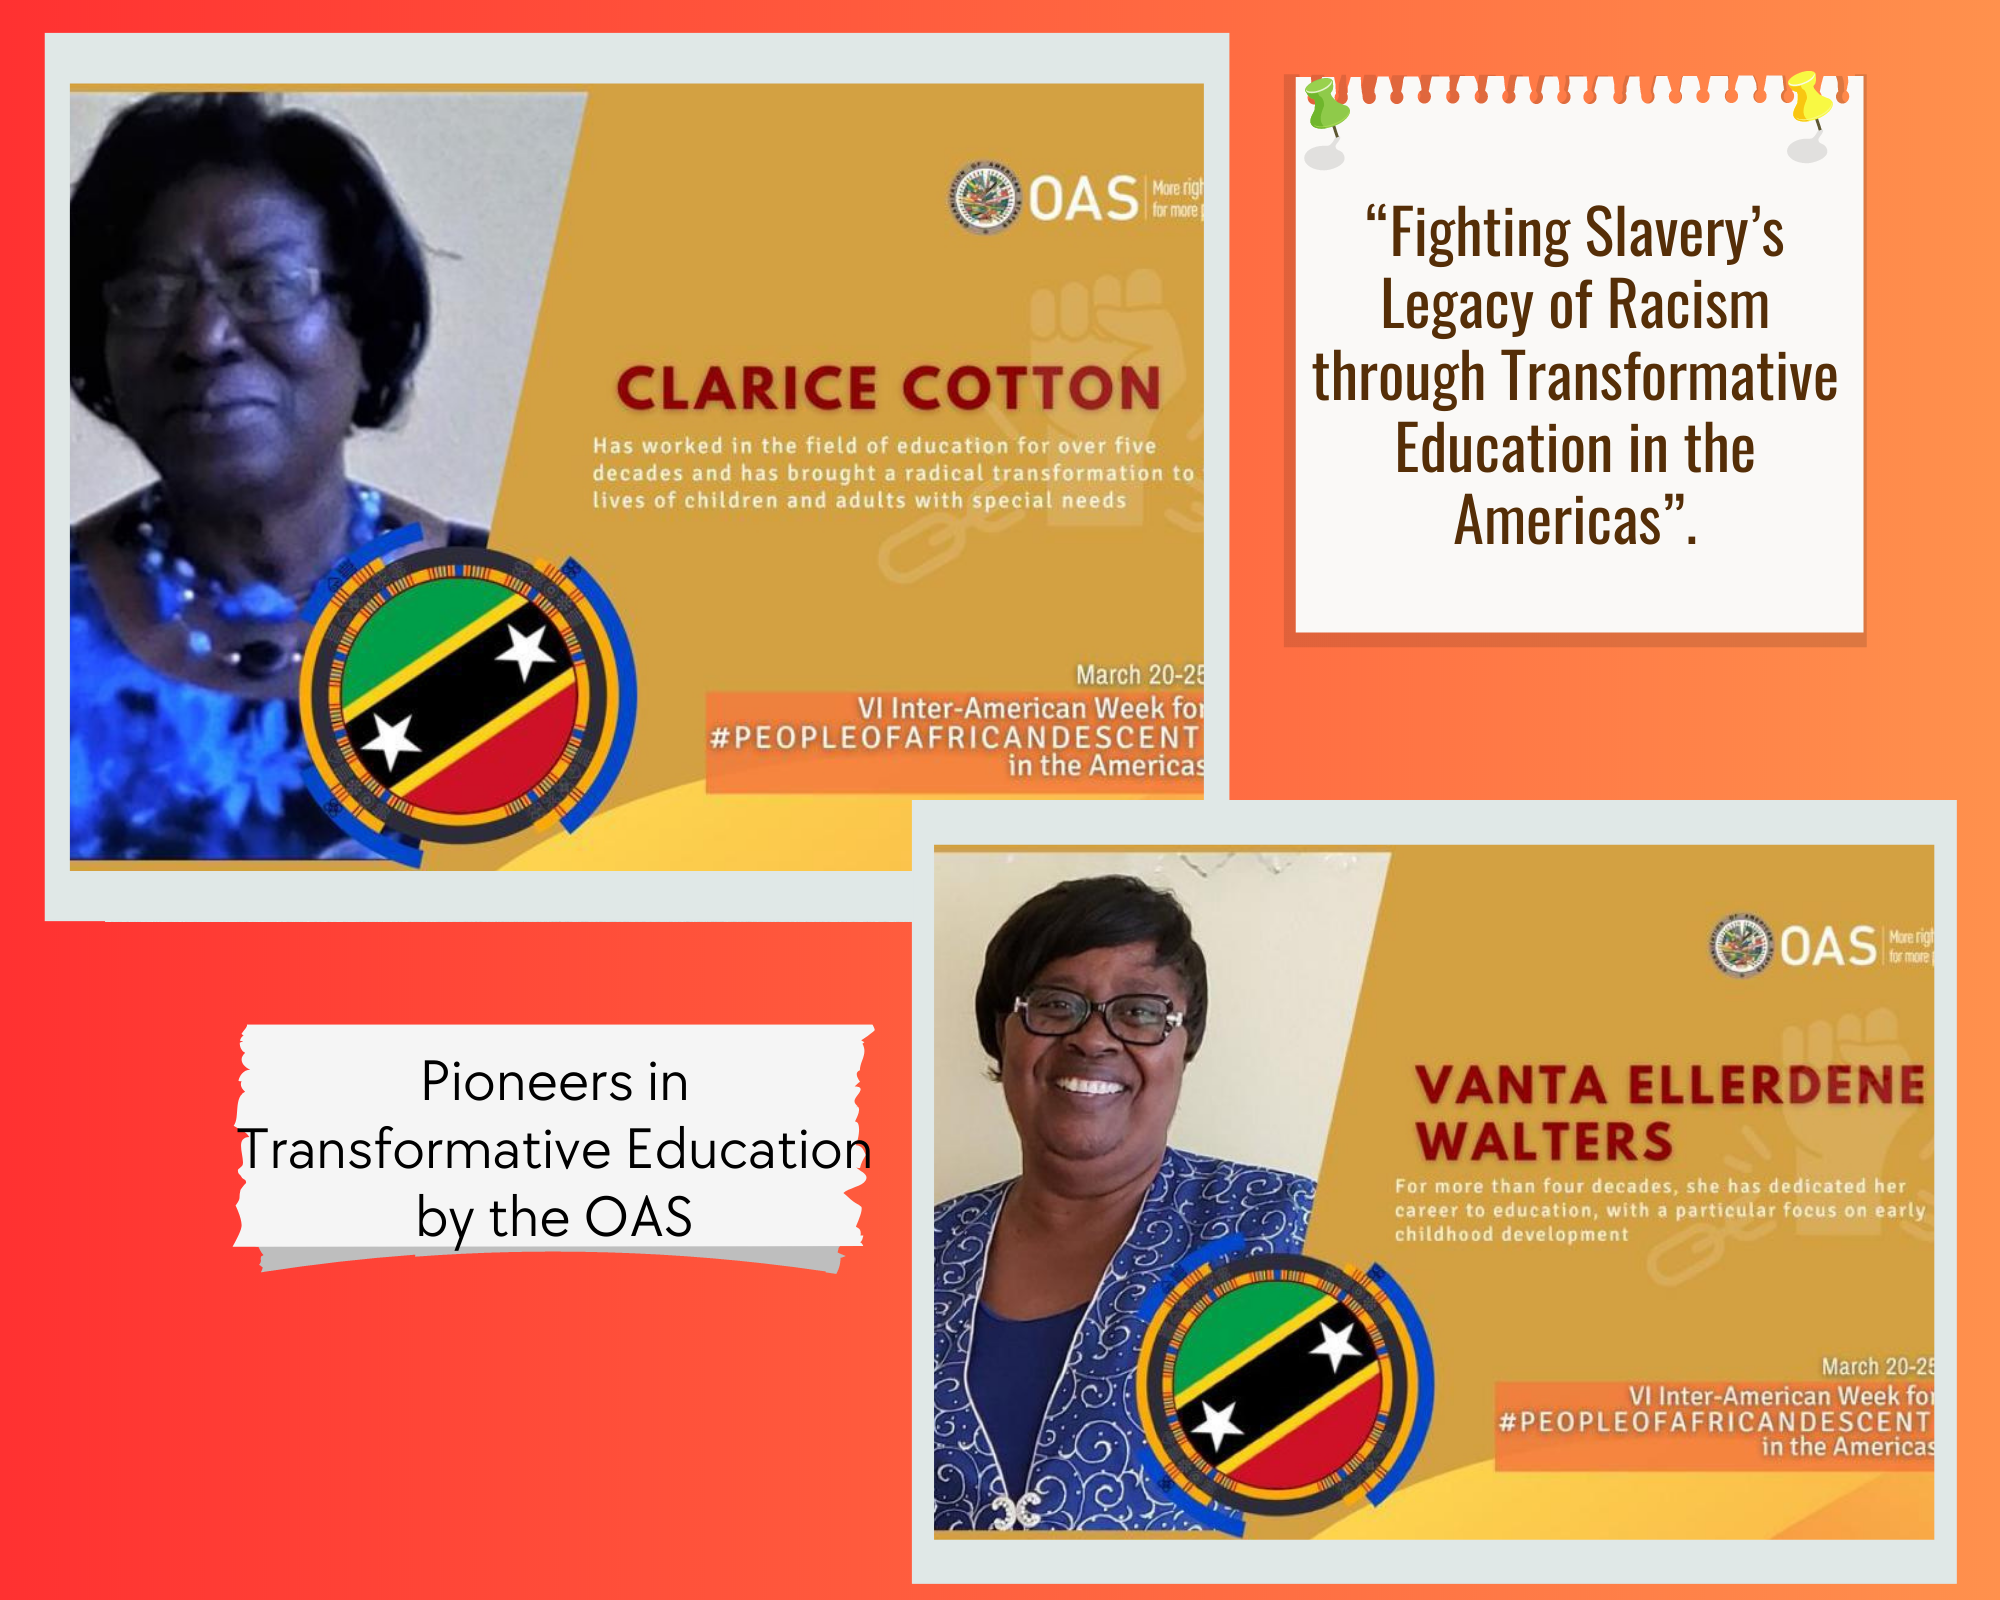 St. Kitts and Nevis Educators Featured as Pioneers in Transformative Education by the OAS